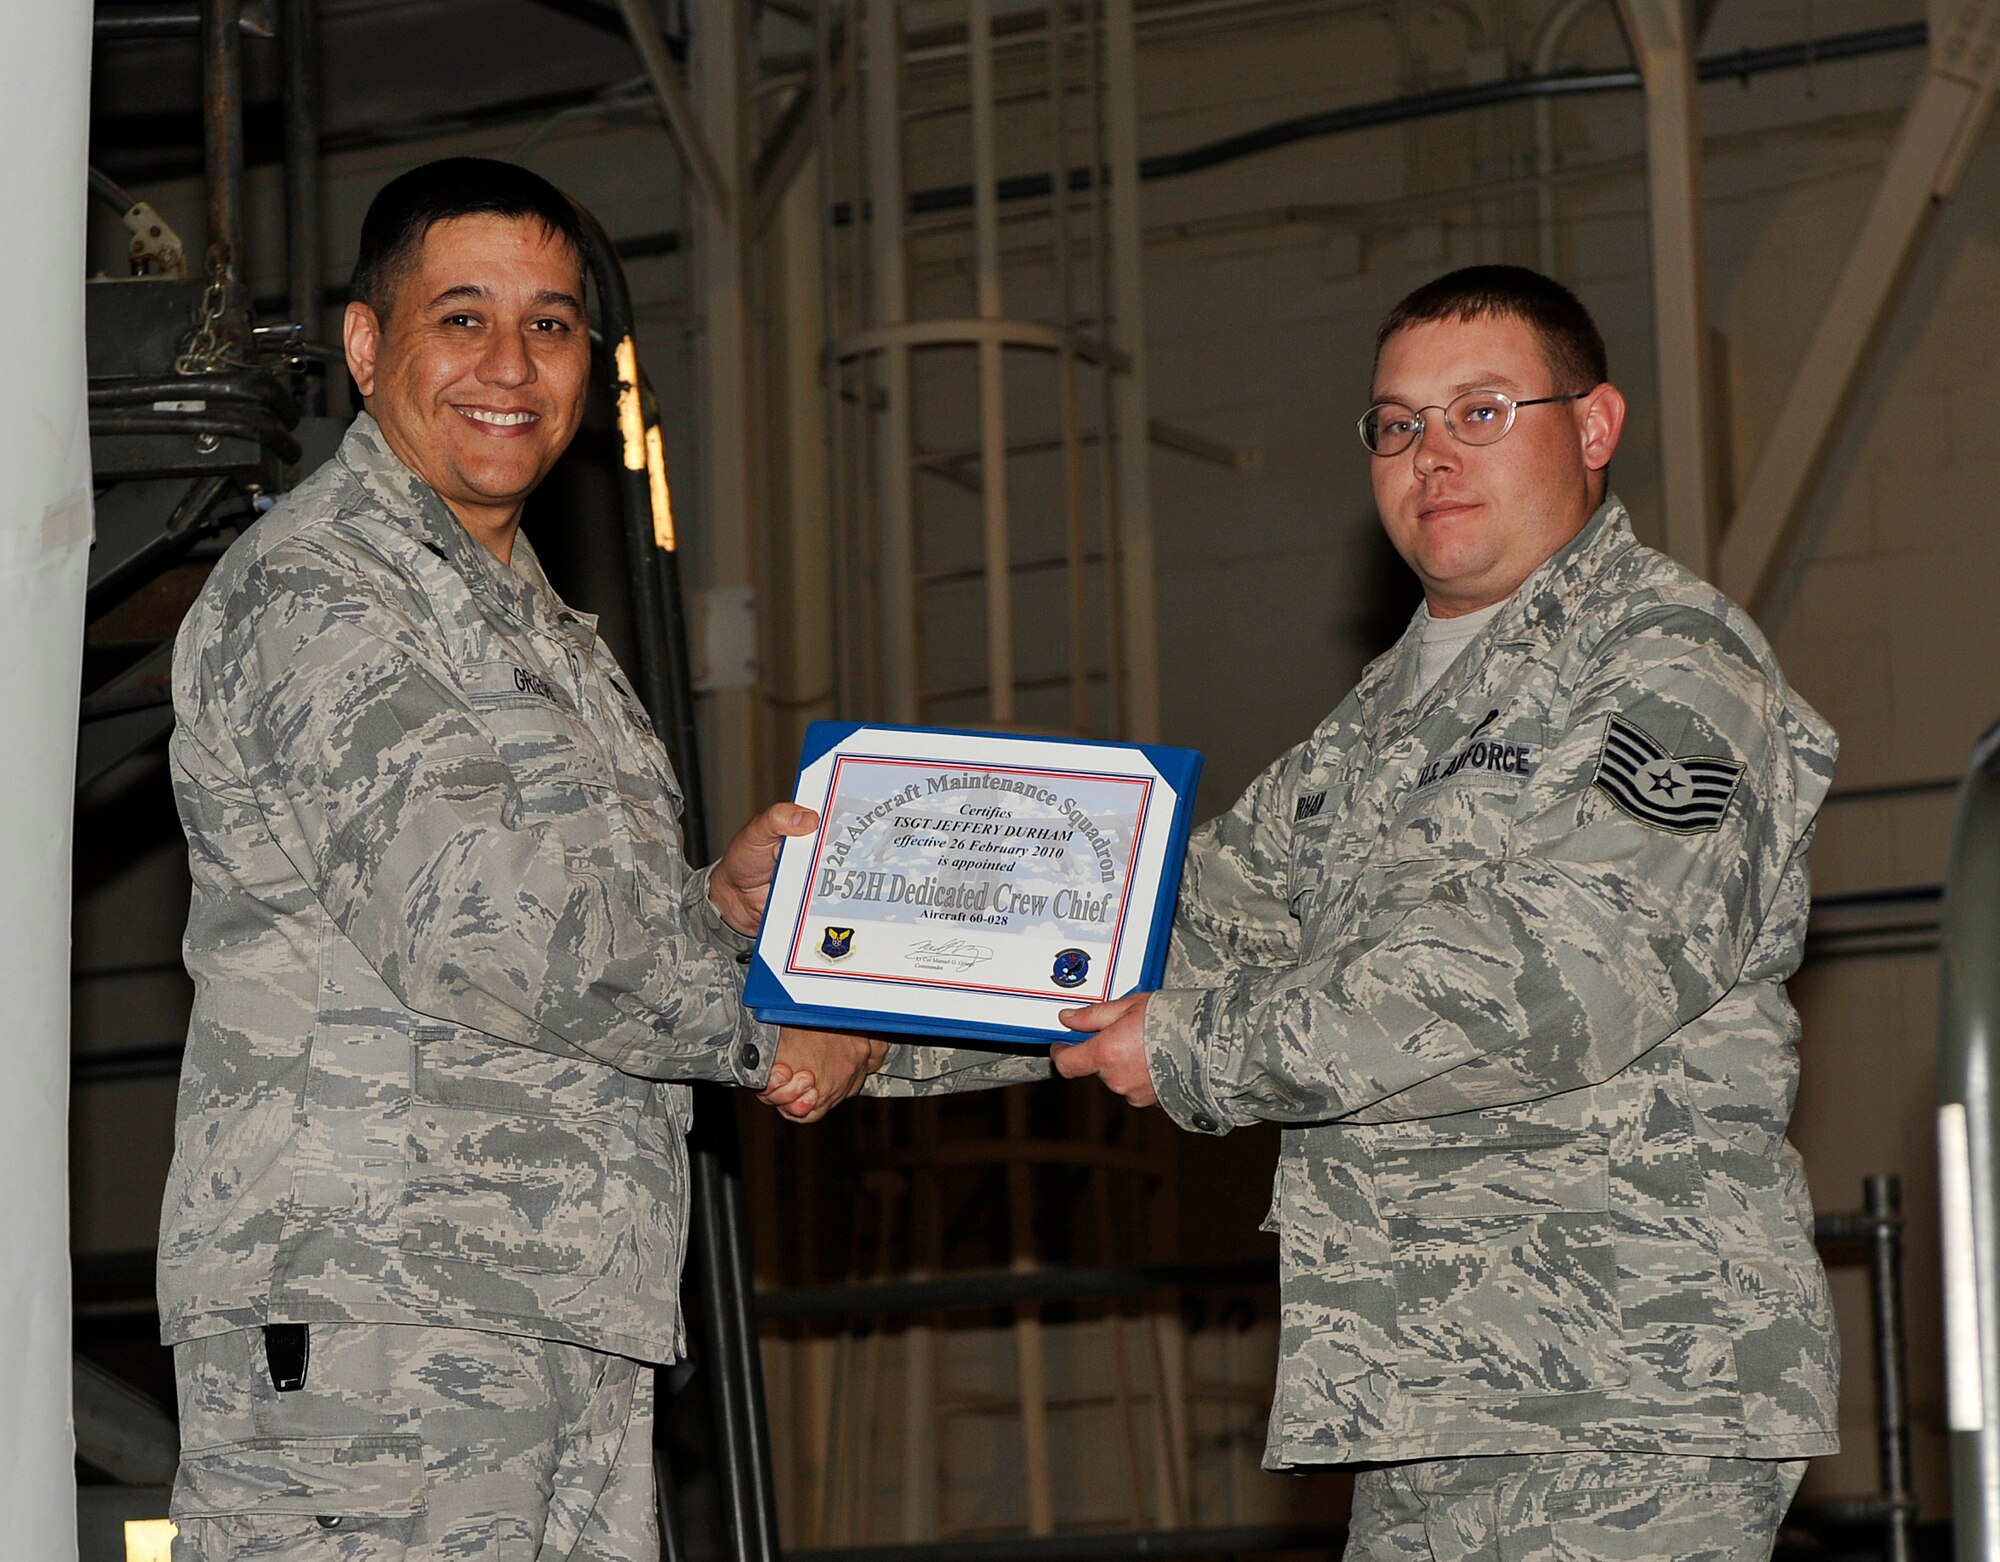 BARKSDALE AIR FORCE BASE, La. -- Lt. Col. Manuel Griego, 2d Aircraft Maintenance Squadron commander, presents Tech. Sgt. Jeffery Durham, 96th Bomb Squadron, with a certificate officially recognizing him as a dedicated crew chief.  The Dedicated Crew Chief Program is designed to appoint ownership of an aircraft to the most proficient, reliable maintainers. (U.S. Air Force photo by Senior Airman Chad Warren) (RELEASED)